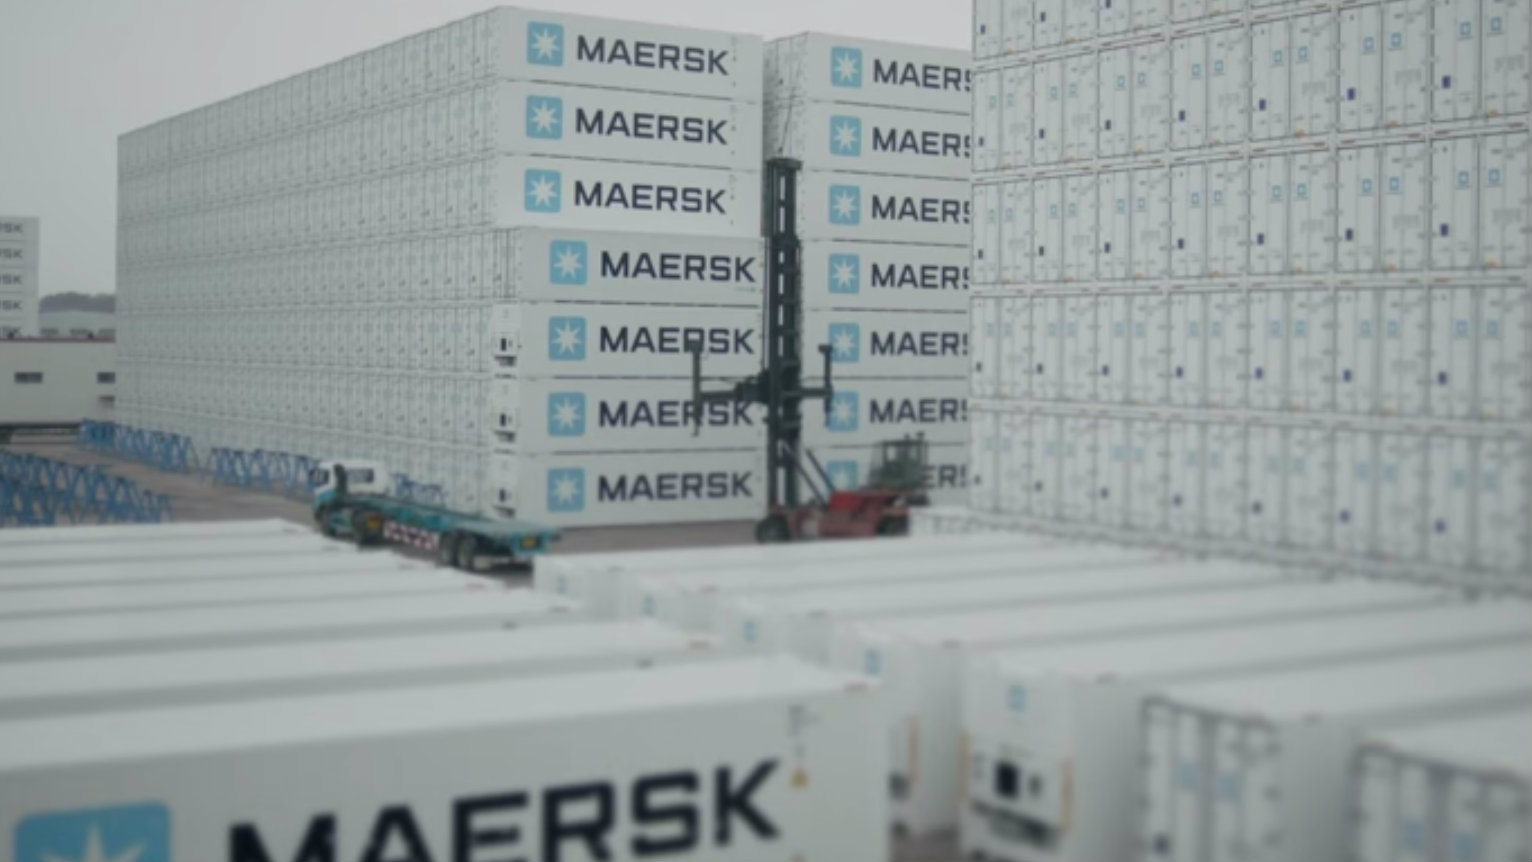 Maersk Shipping Containers